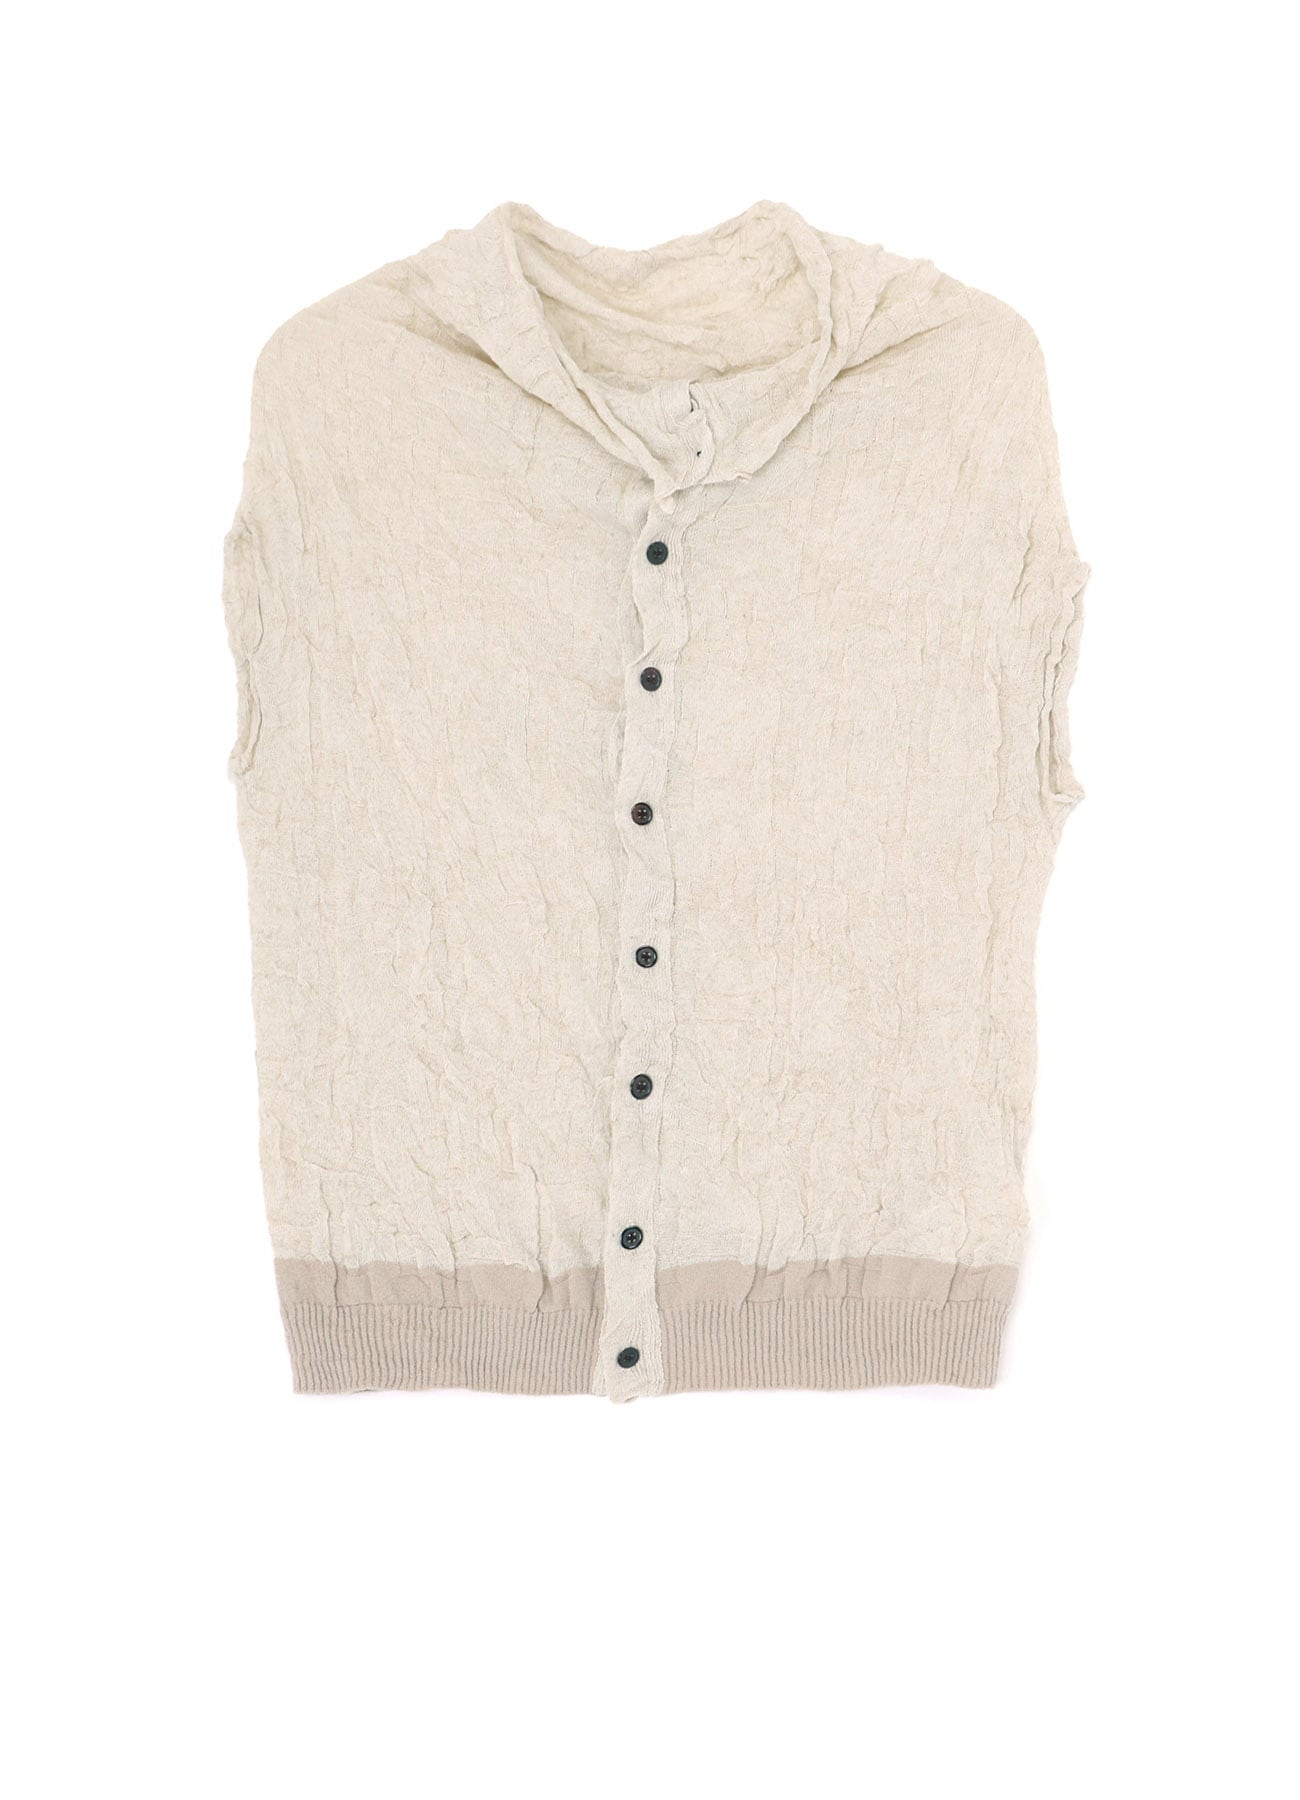 12G1P LINKS LOOSE NECK SLEEVELESS CARDIGAN(S Beige): Y's｜THE SHOP 